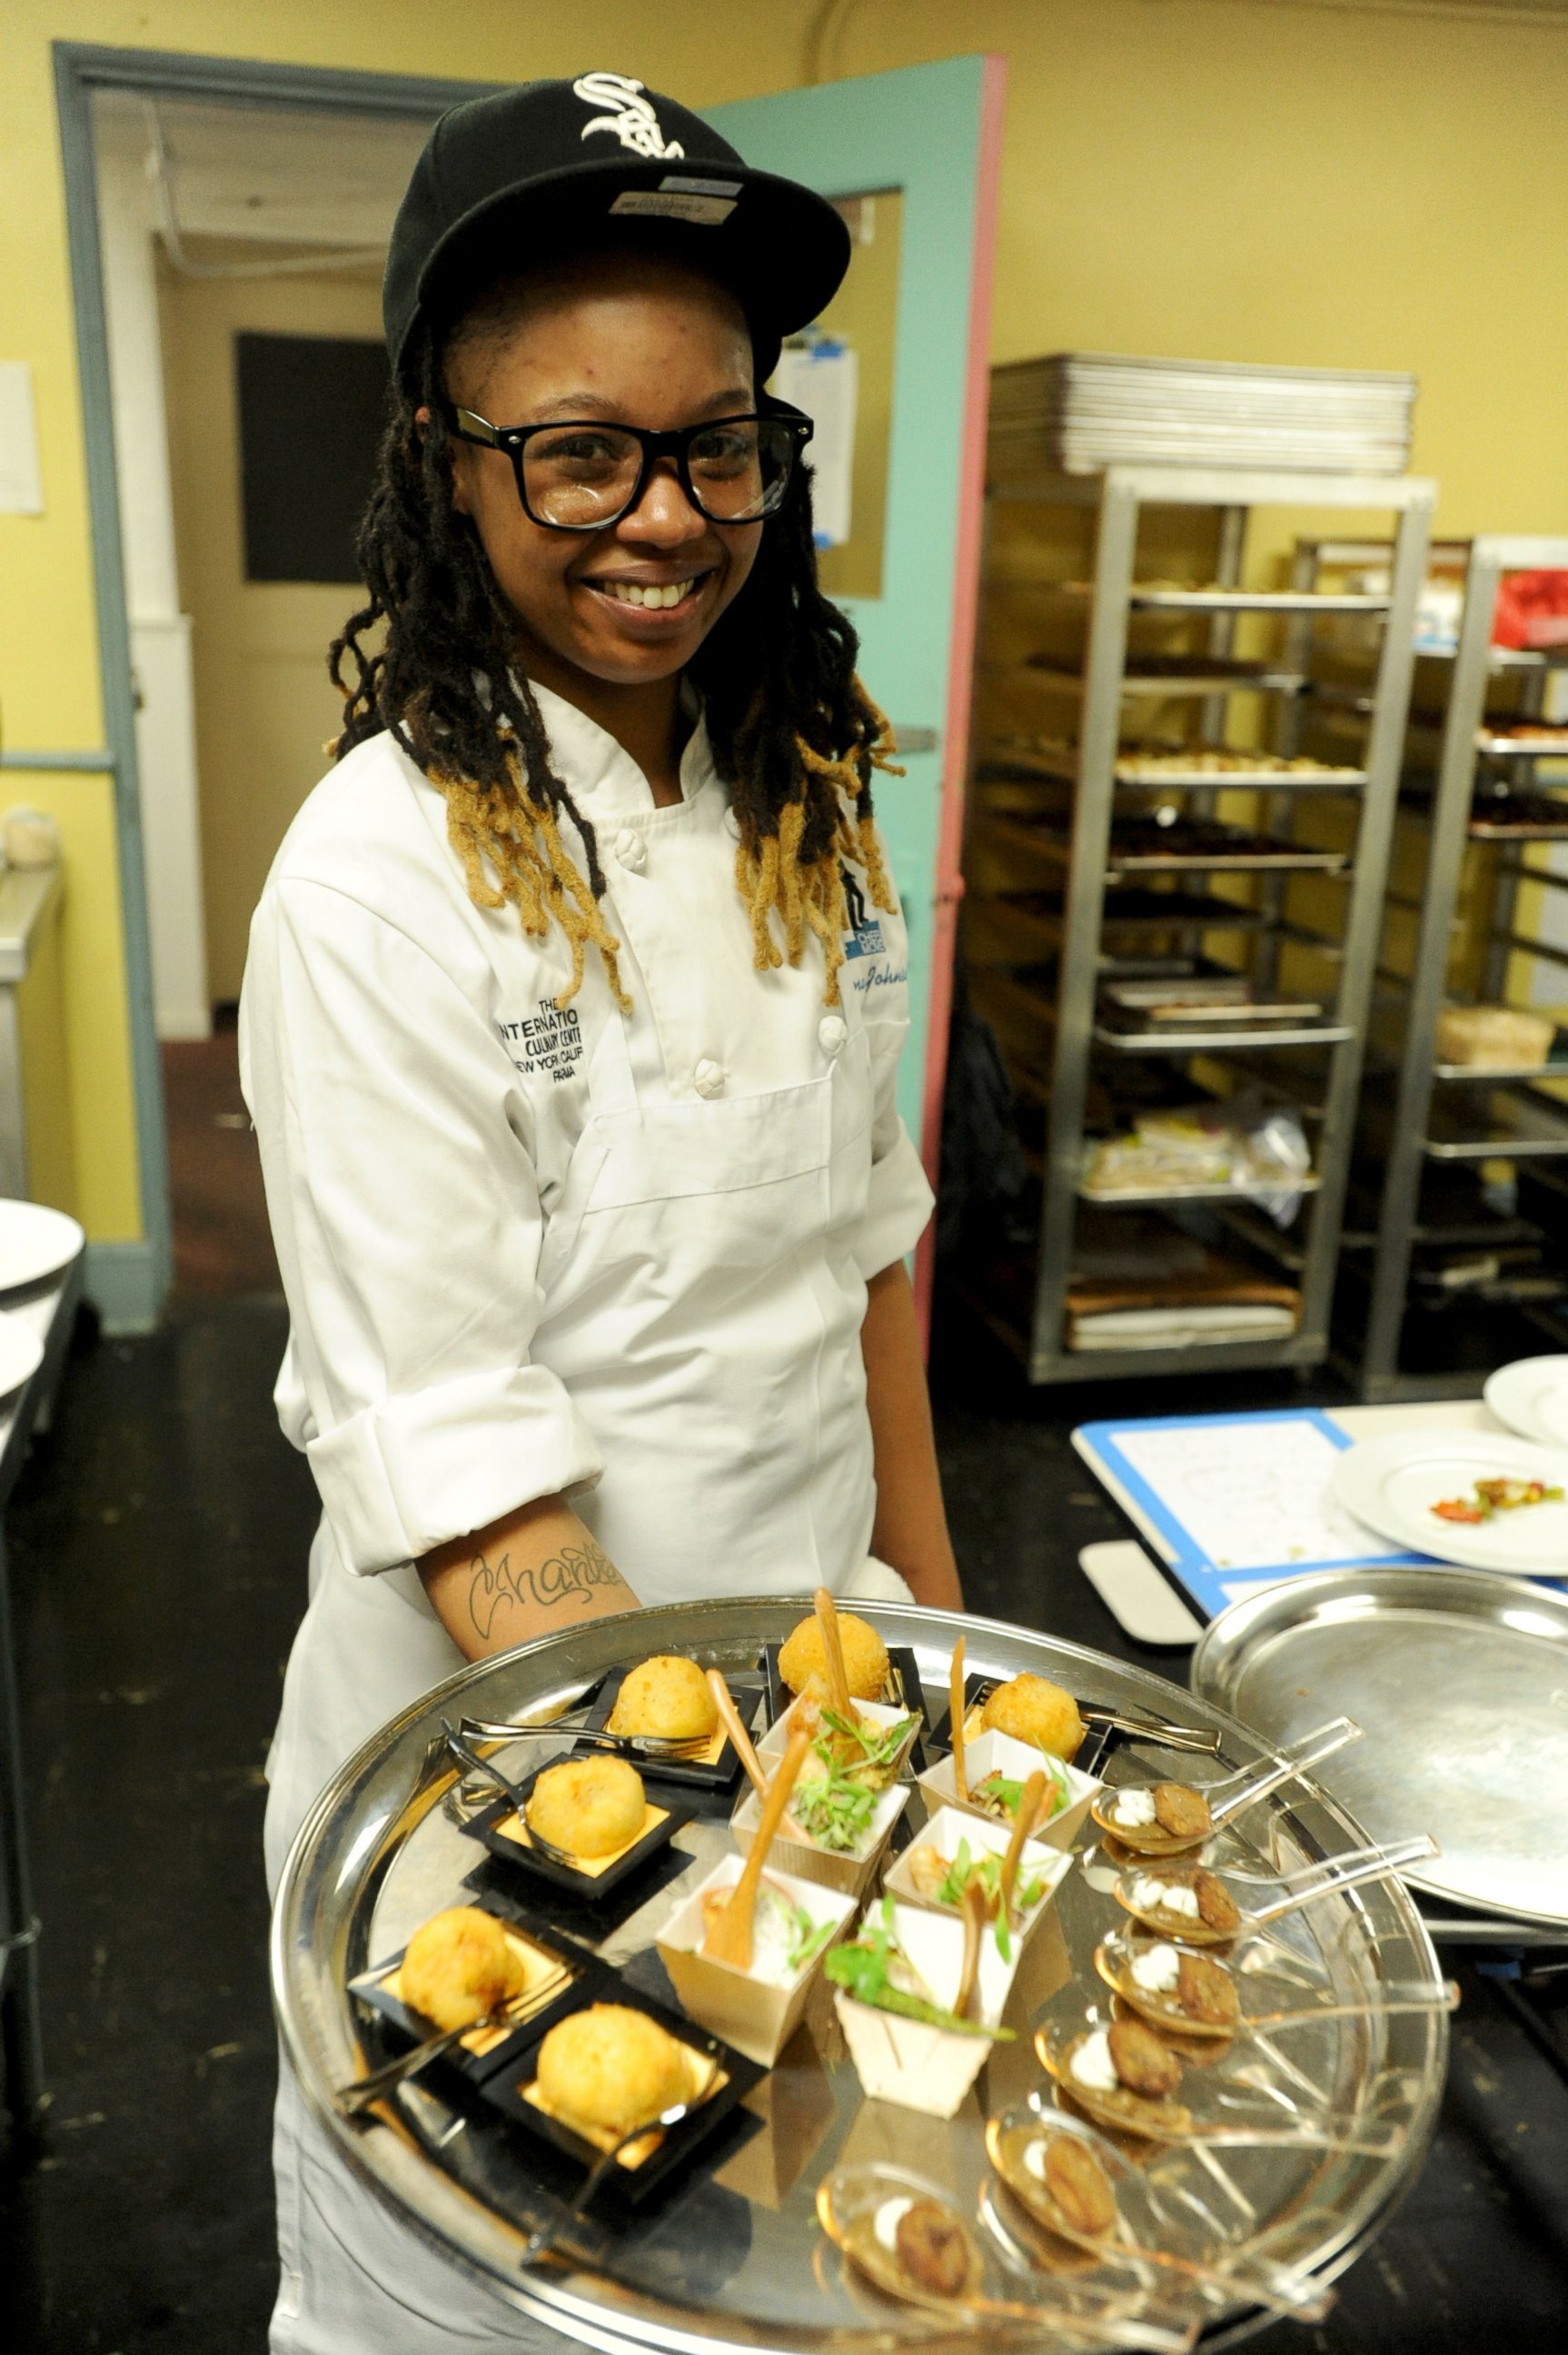 PHOTO: After graduation, Syrena Johnson returned home to work at some of New Orleans' top restaurants and to help her community.